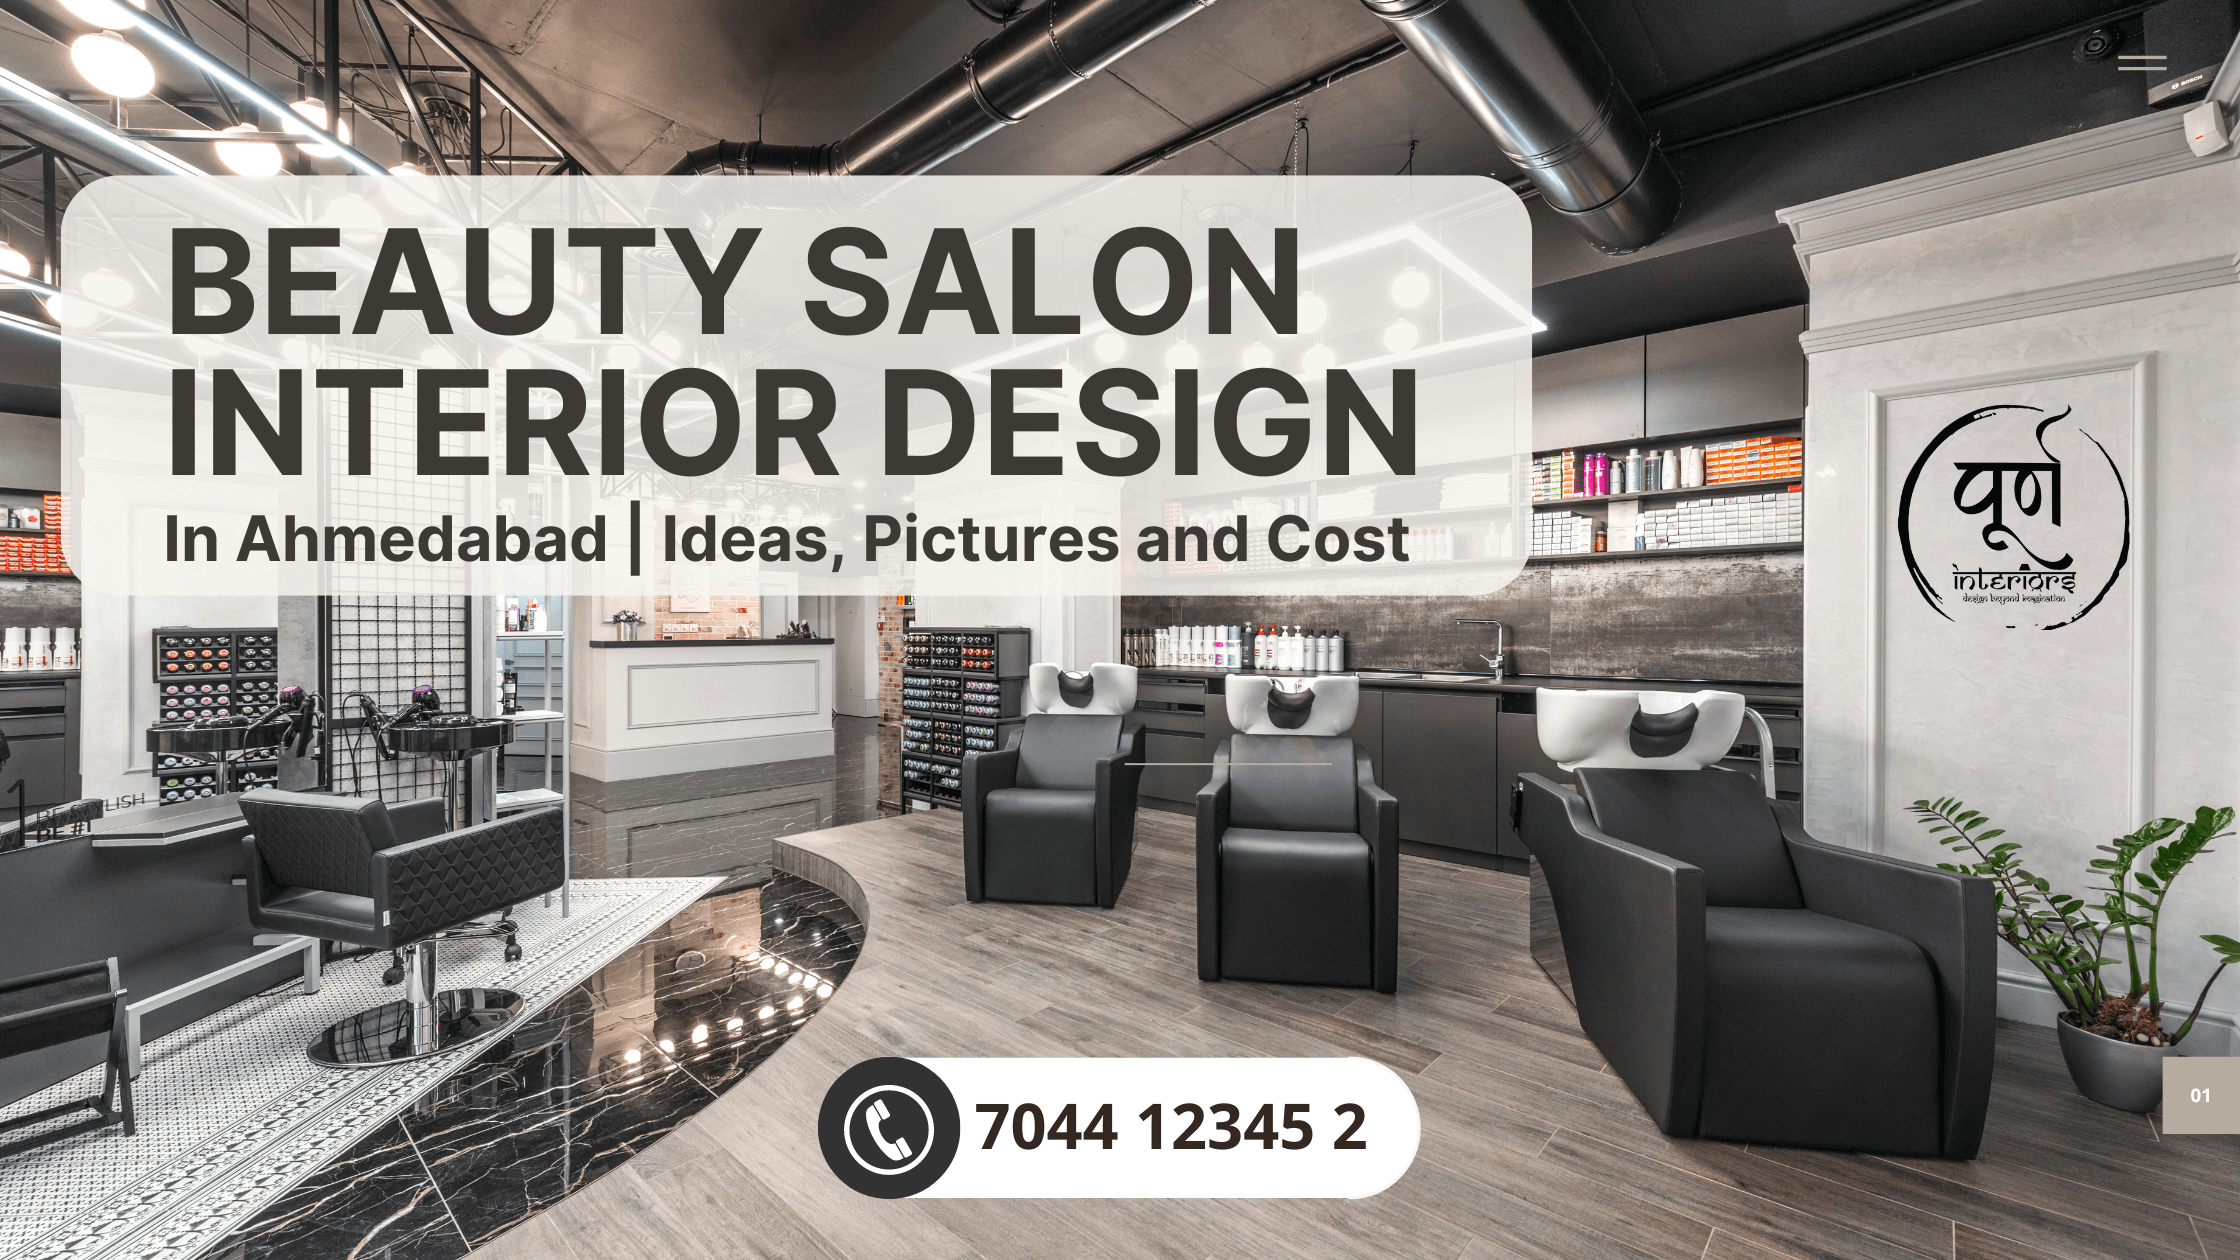 Beauty Salon Interior Design In Ahmedabad Ideas Pictures And Cost